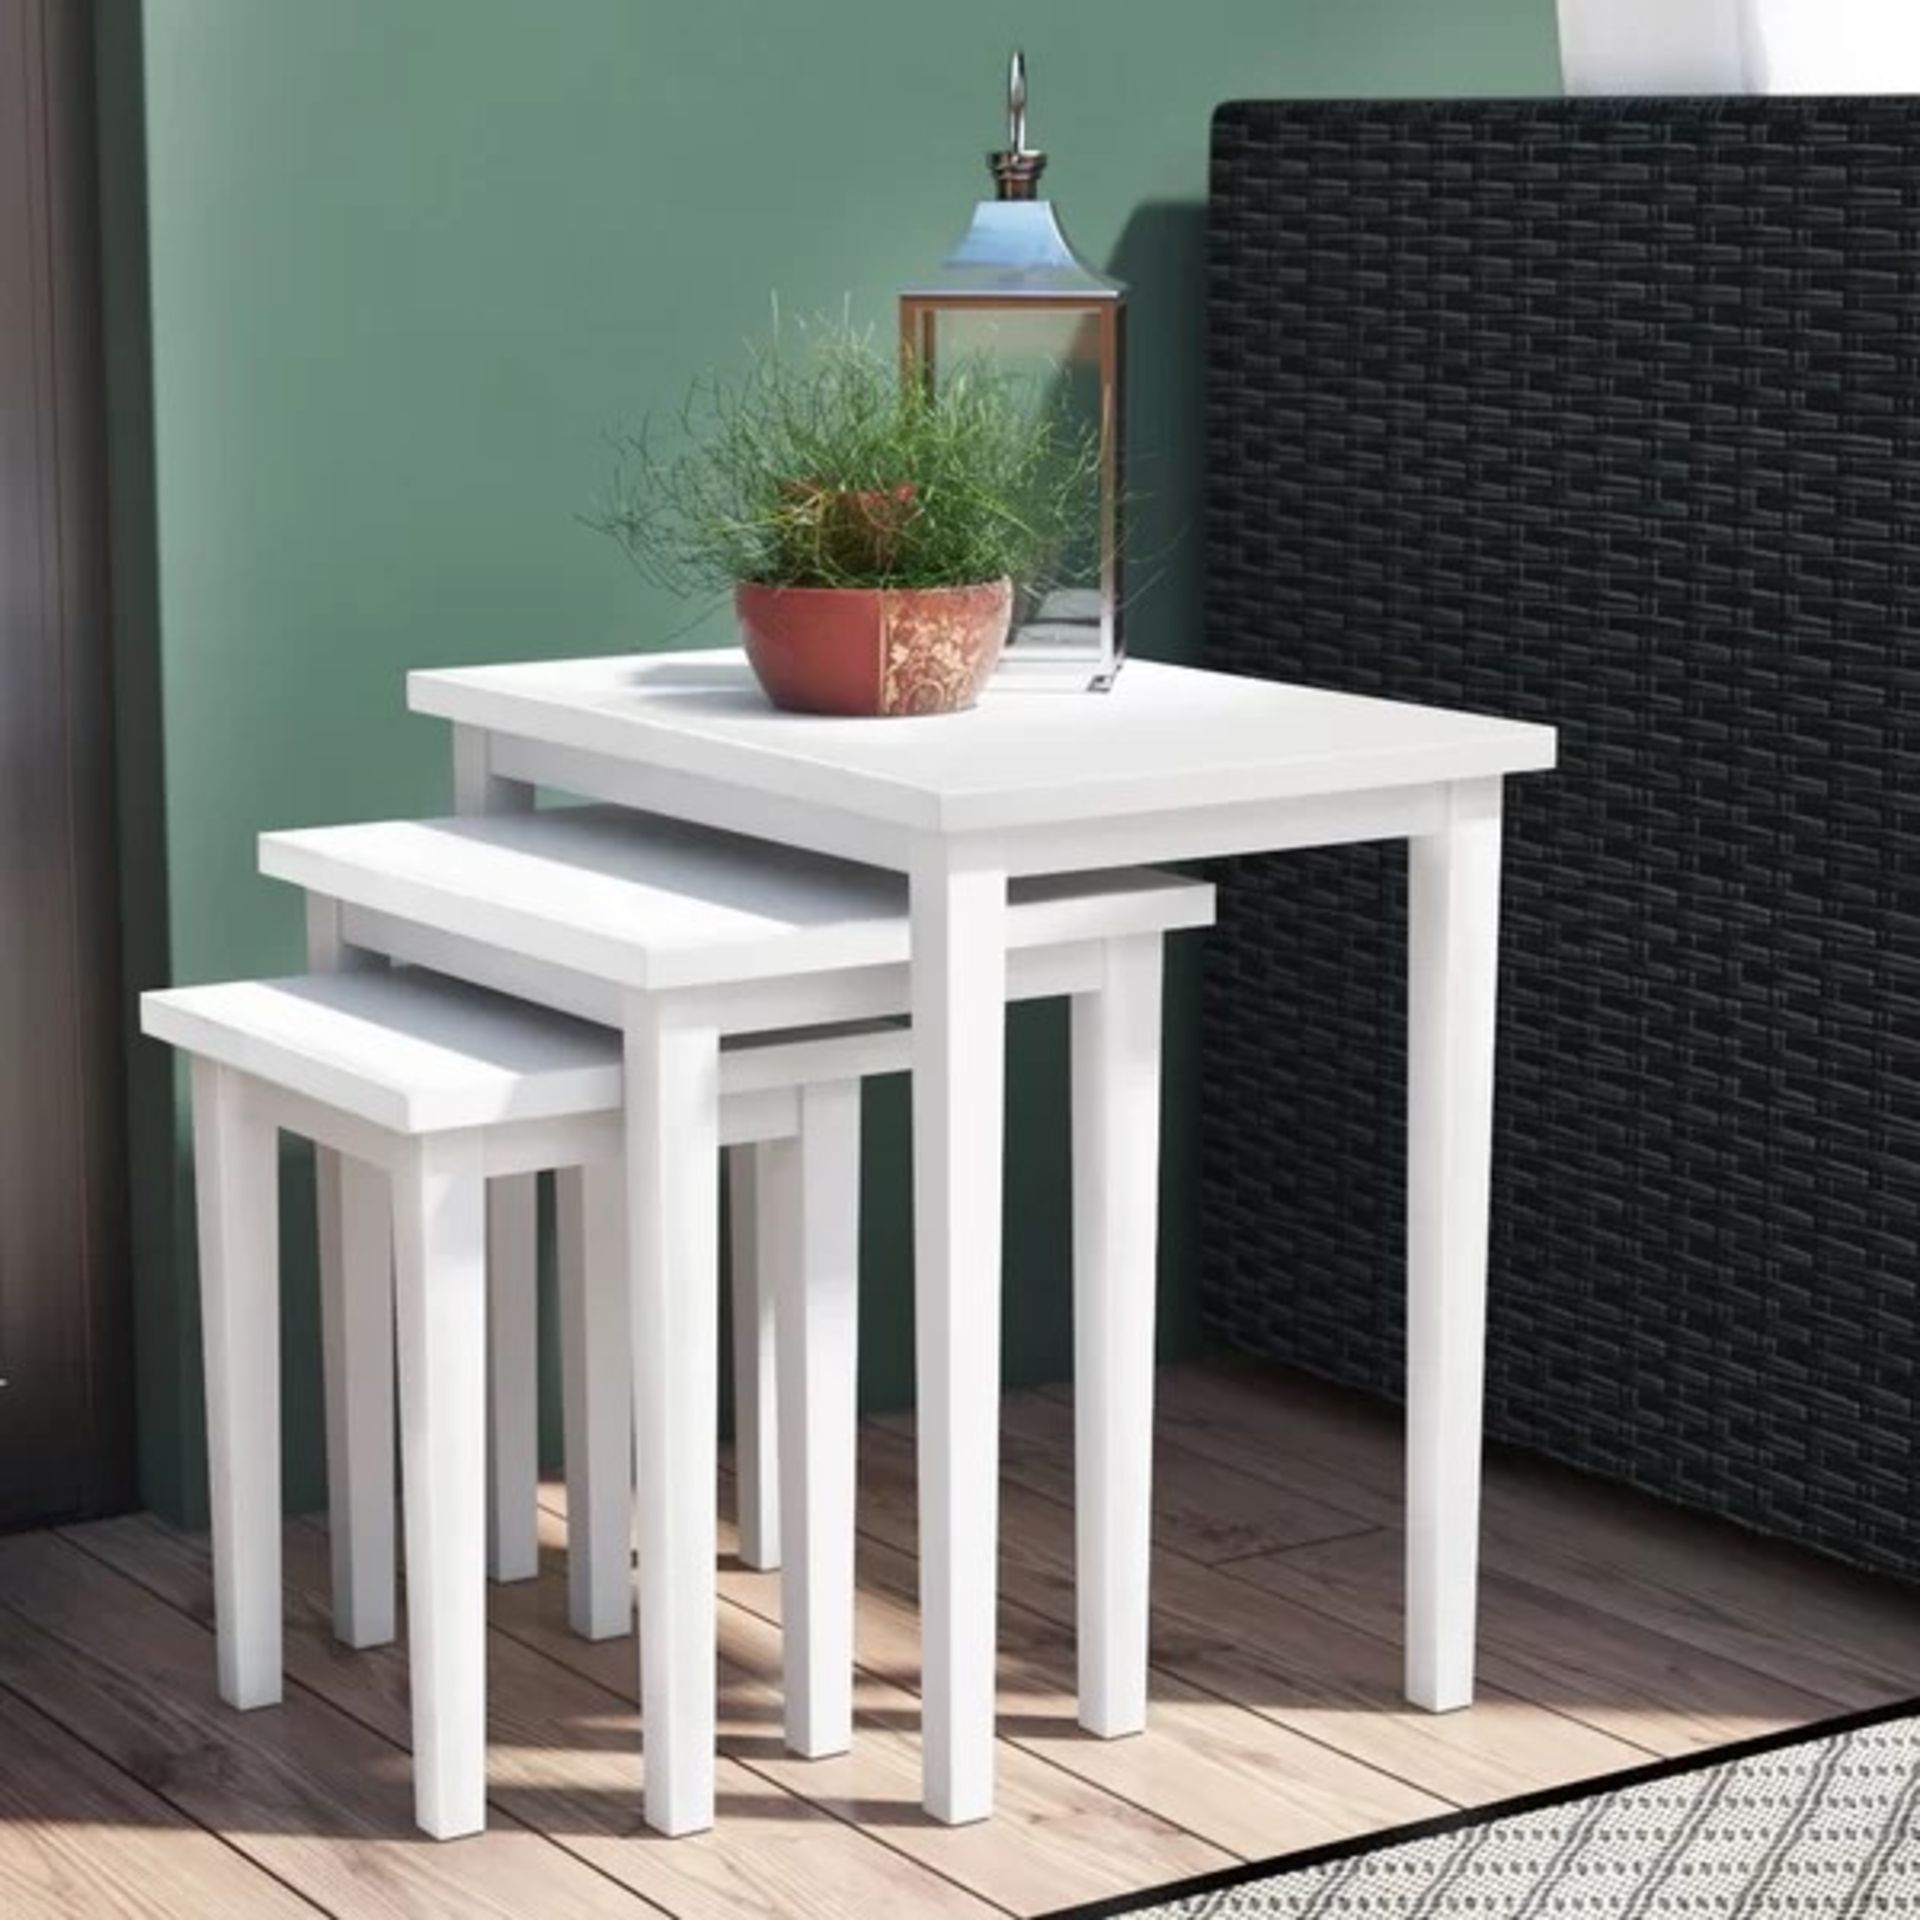 RRP £73.99 - Elvina 3 Piece Nest of Tables